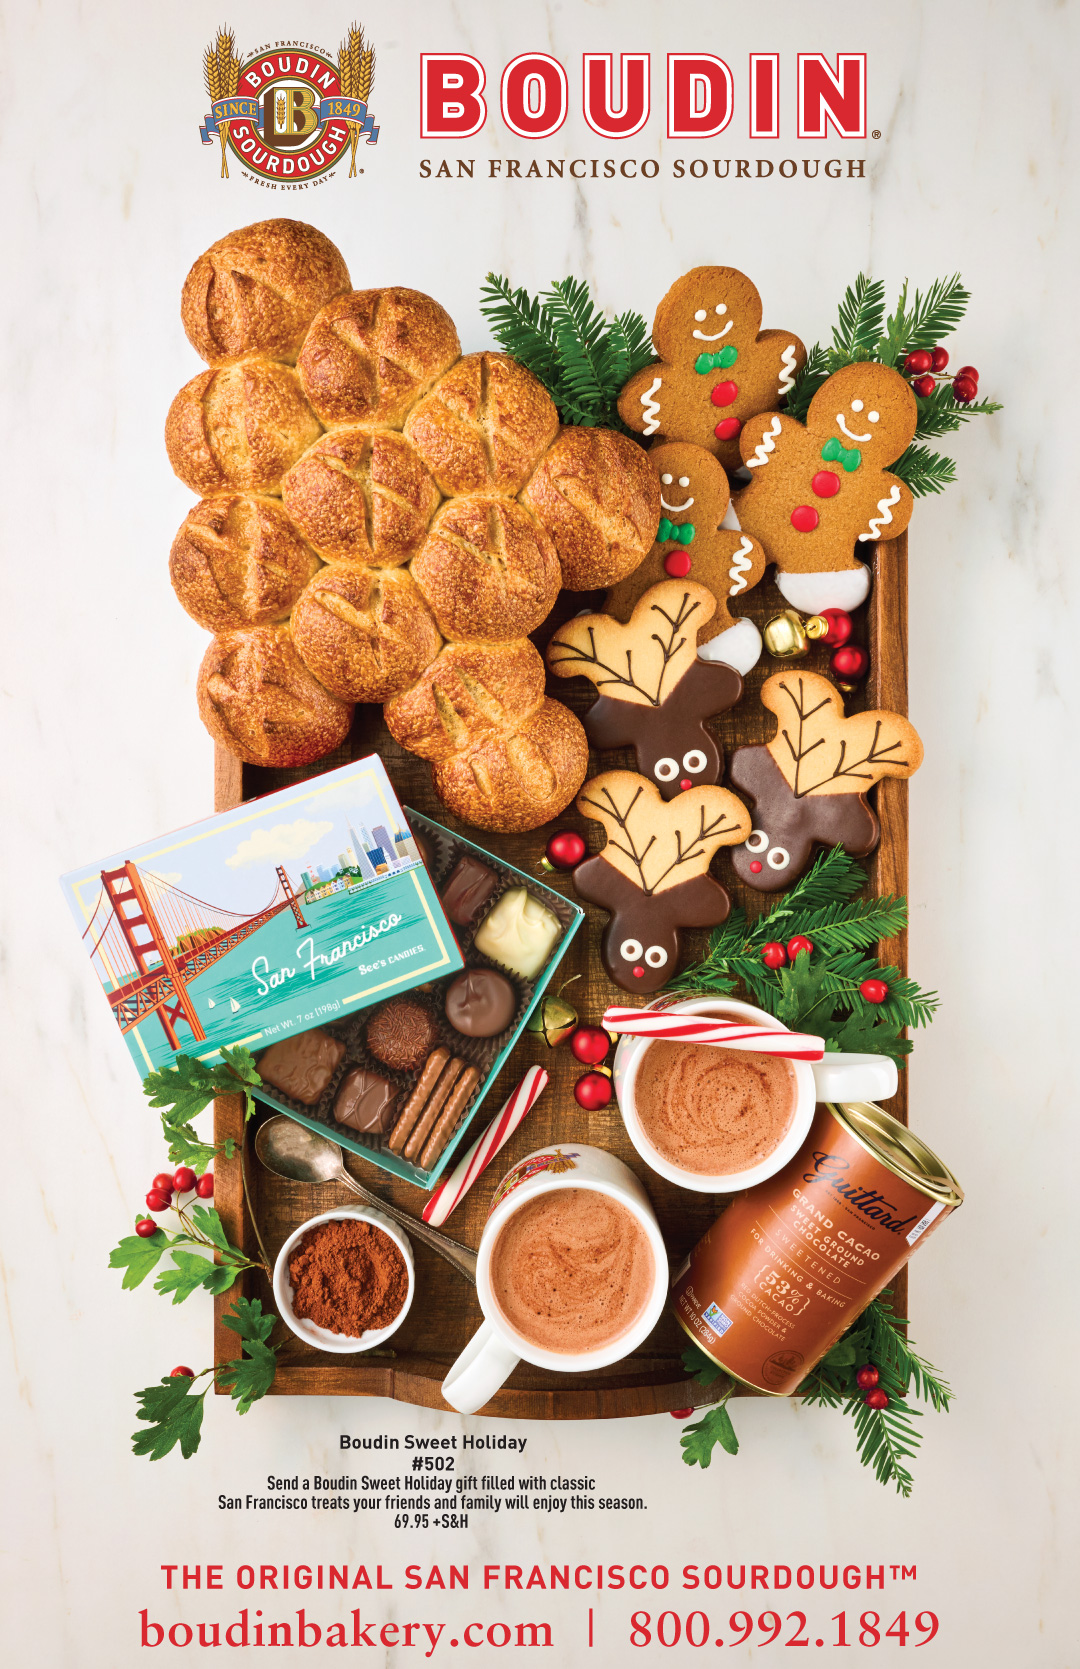 Boudin Sweet Holiday #502 with Sourdough Holiday Tree, Gingerbread and Reindeer Cookies, Chocolates and Hot Cocoa in a wooden tray on marble surface and priced at 69.95 +S&H